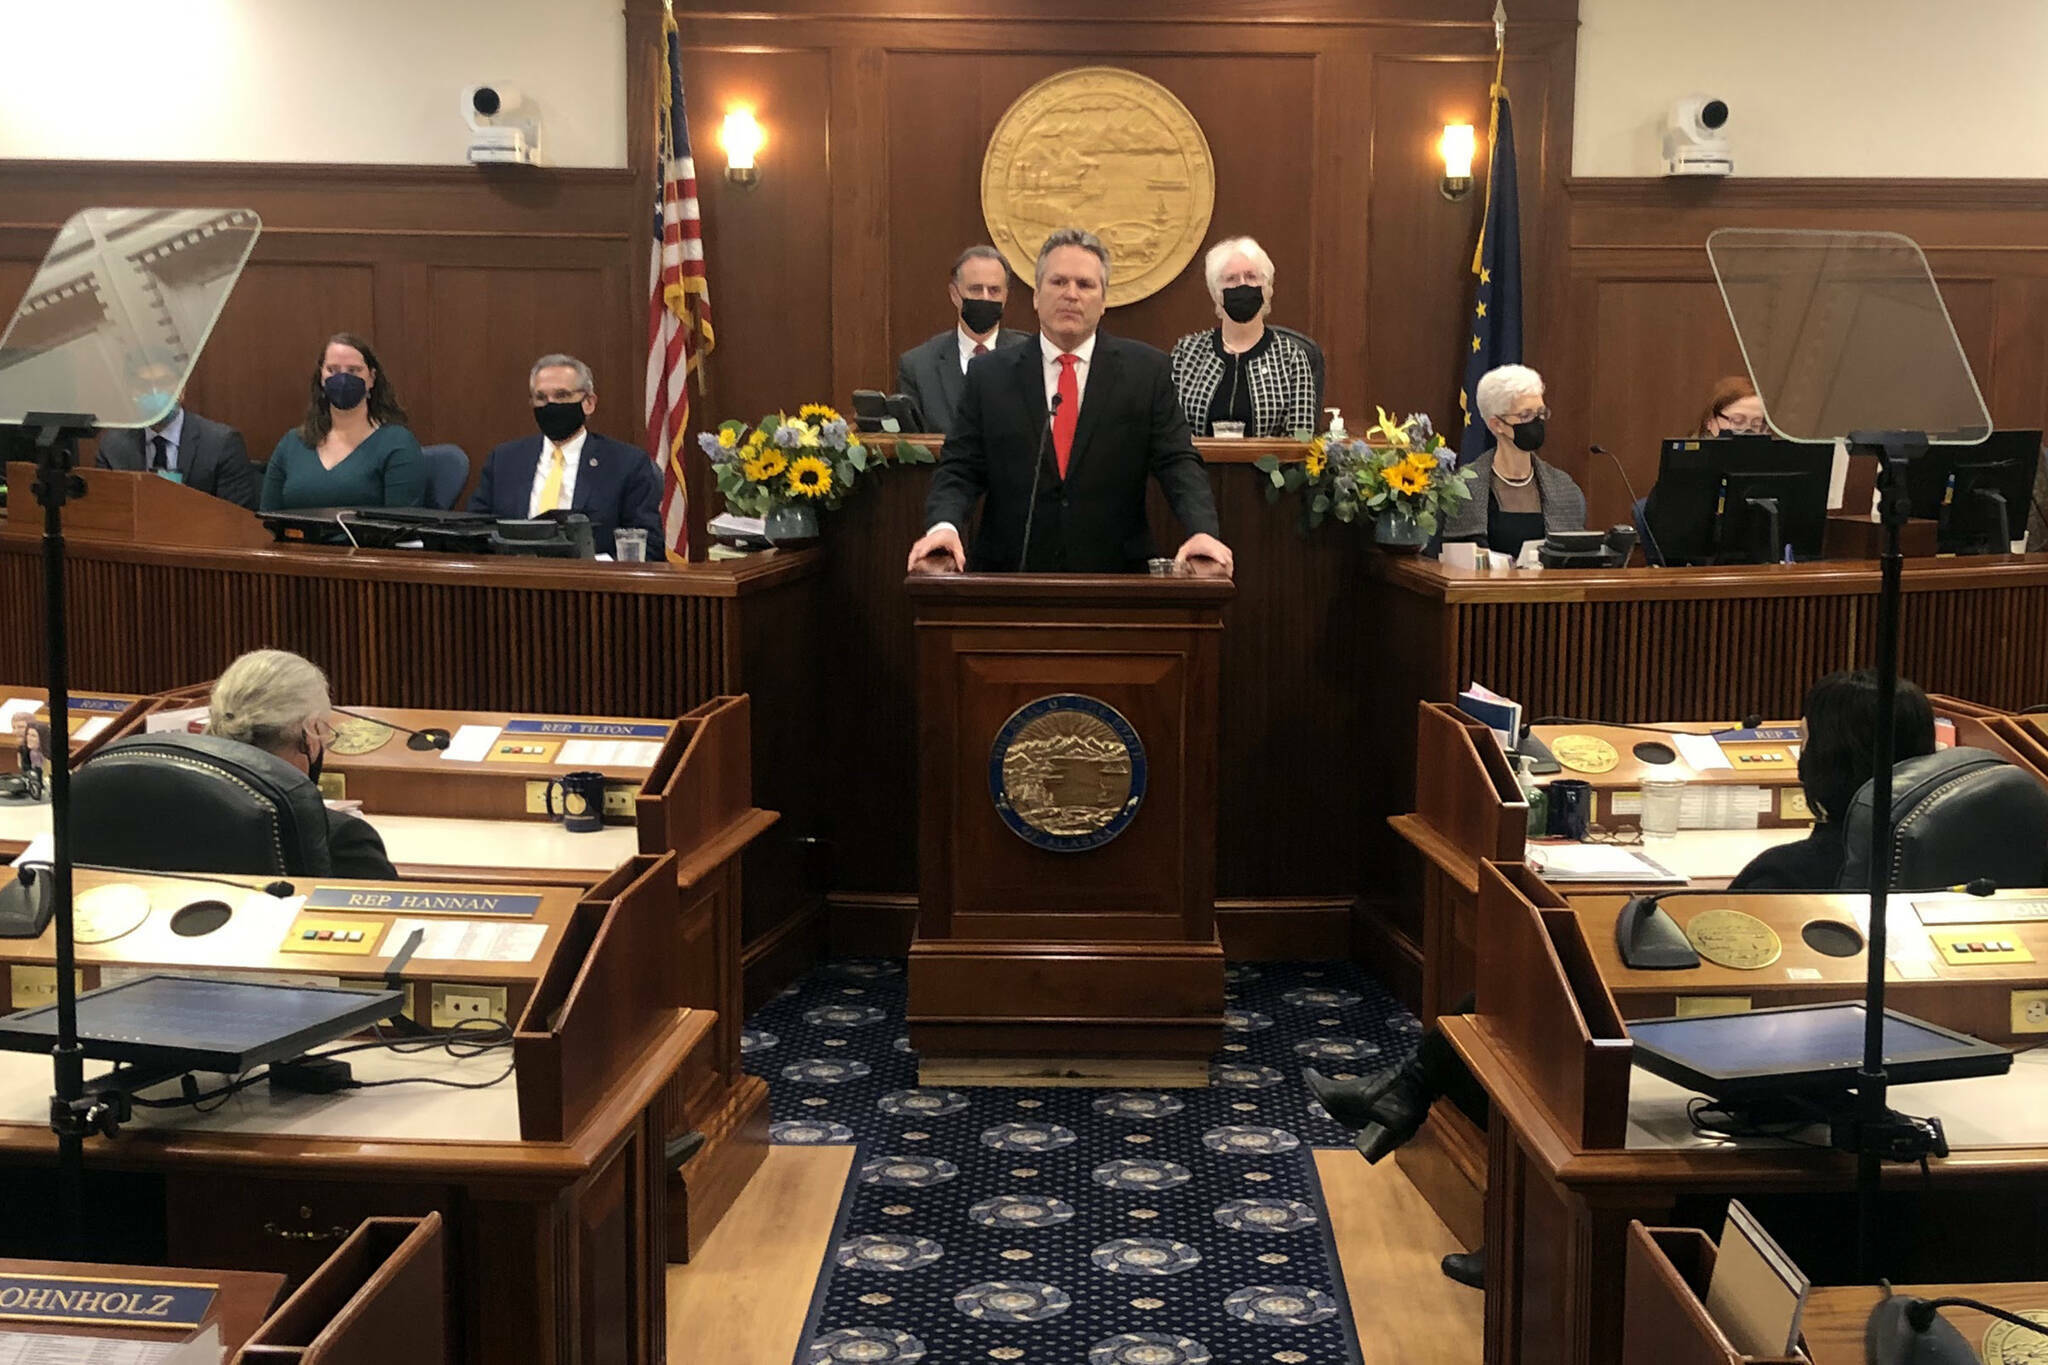 Gov. Mike Dunleavy delivers his 2022 State of the State address before a joint session of the Alaska State Legislature. (Peter Segall / Juneau Empire File)